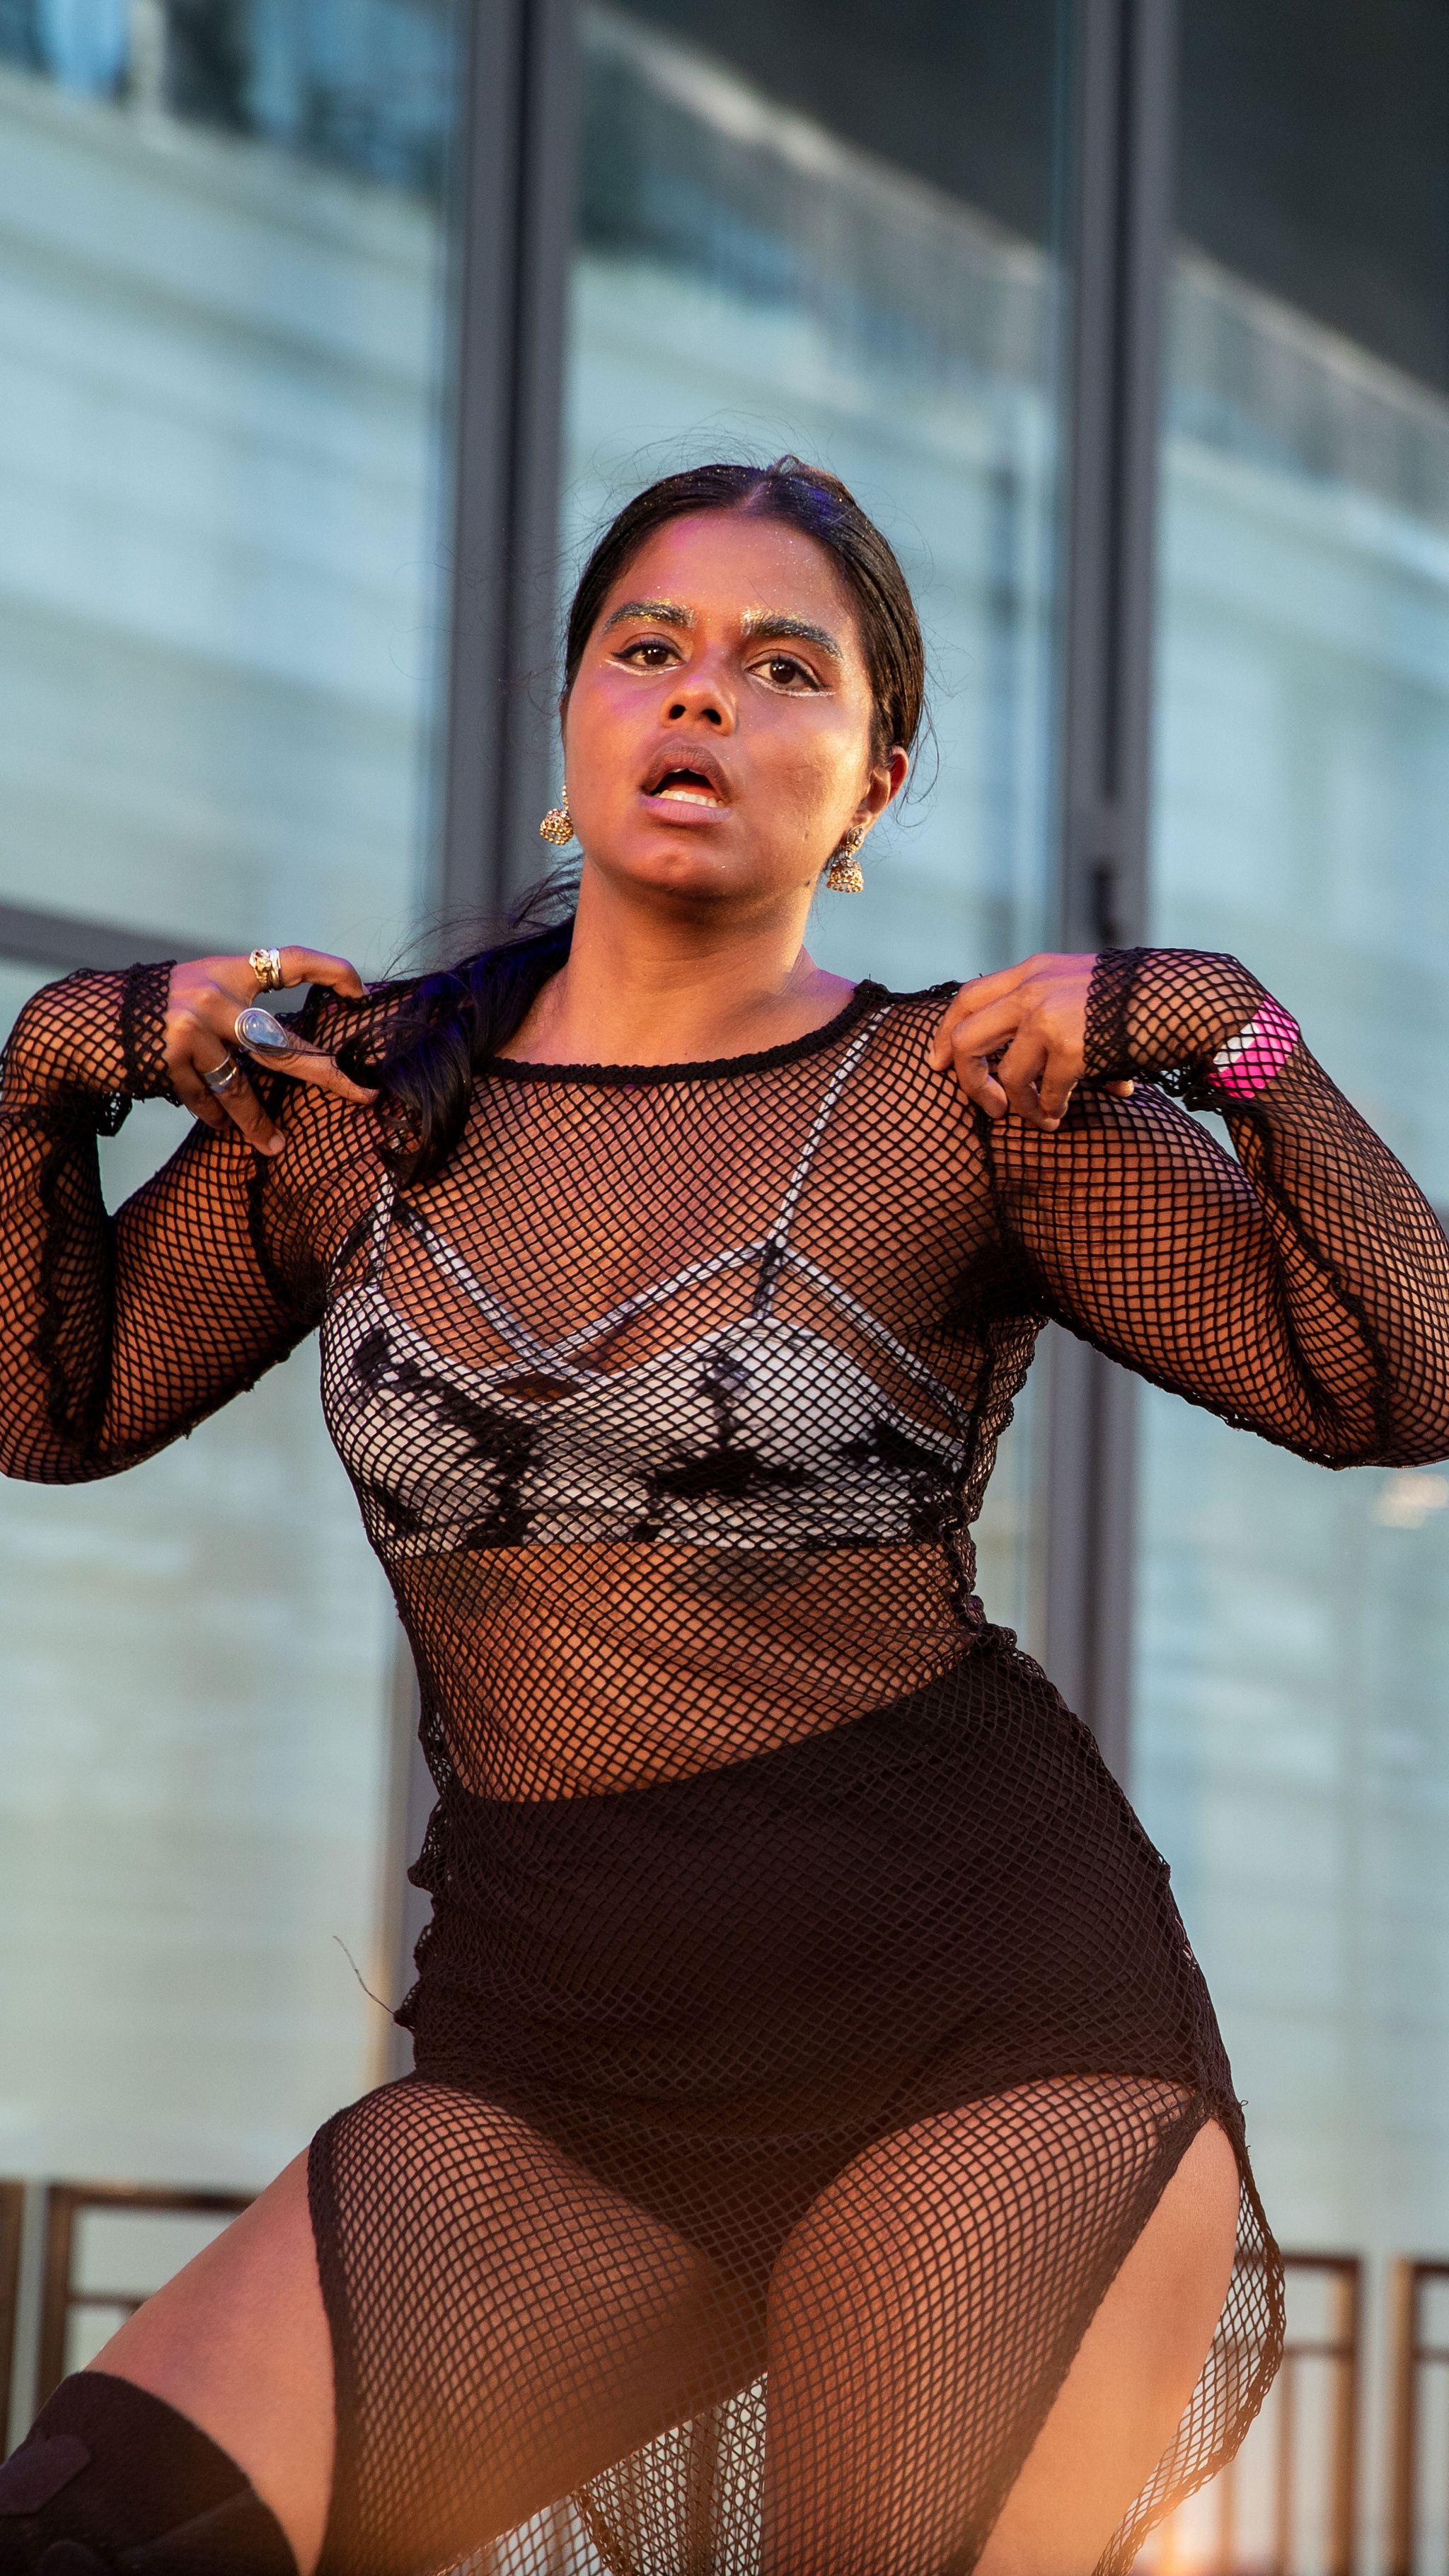 Woman dancing on a stage in fishnet dress.